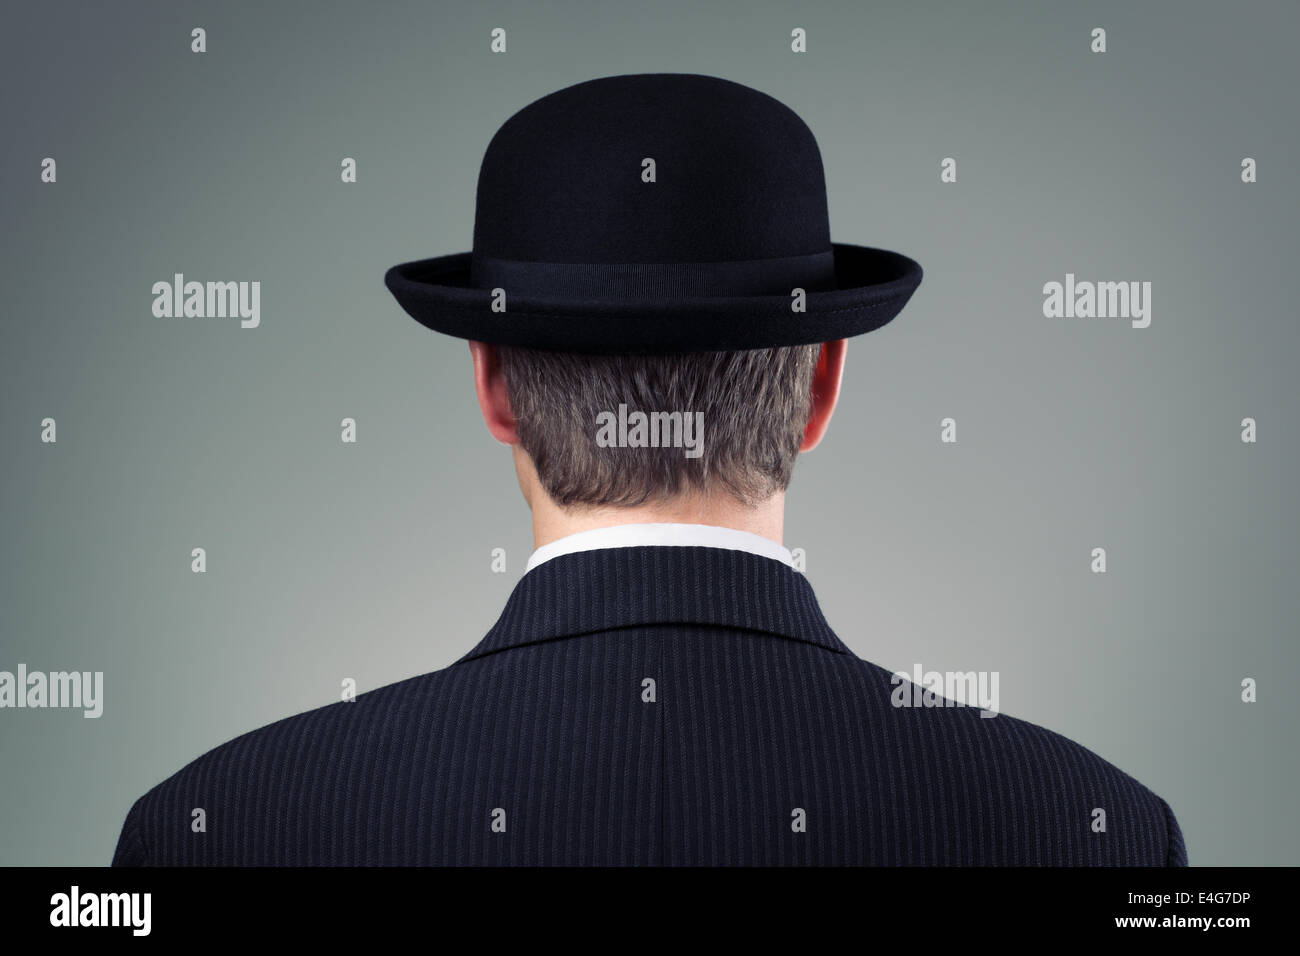 Businessman in bowler hat Stock Photo